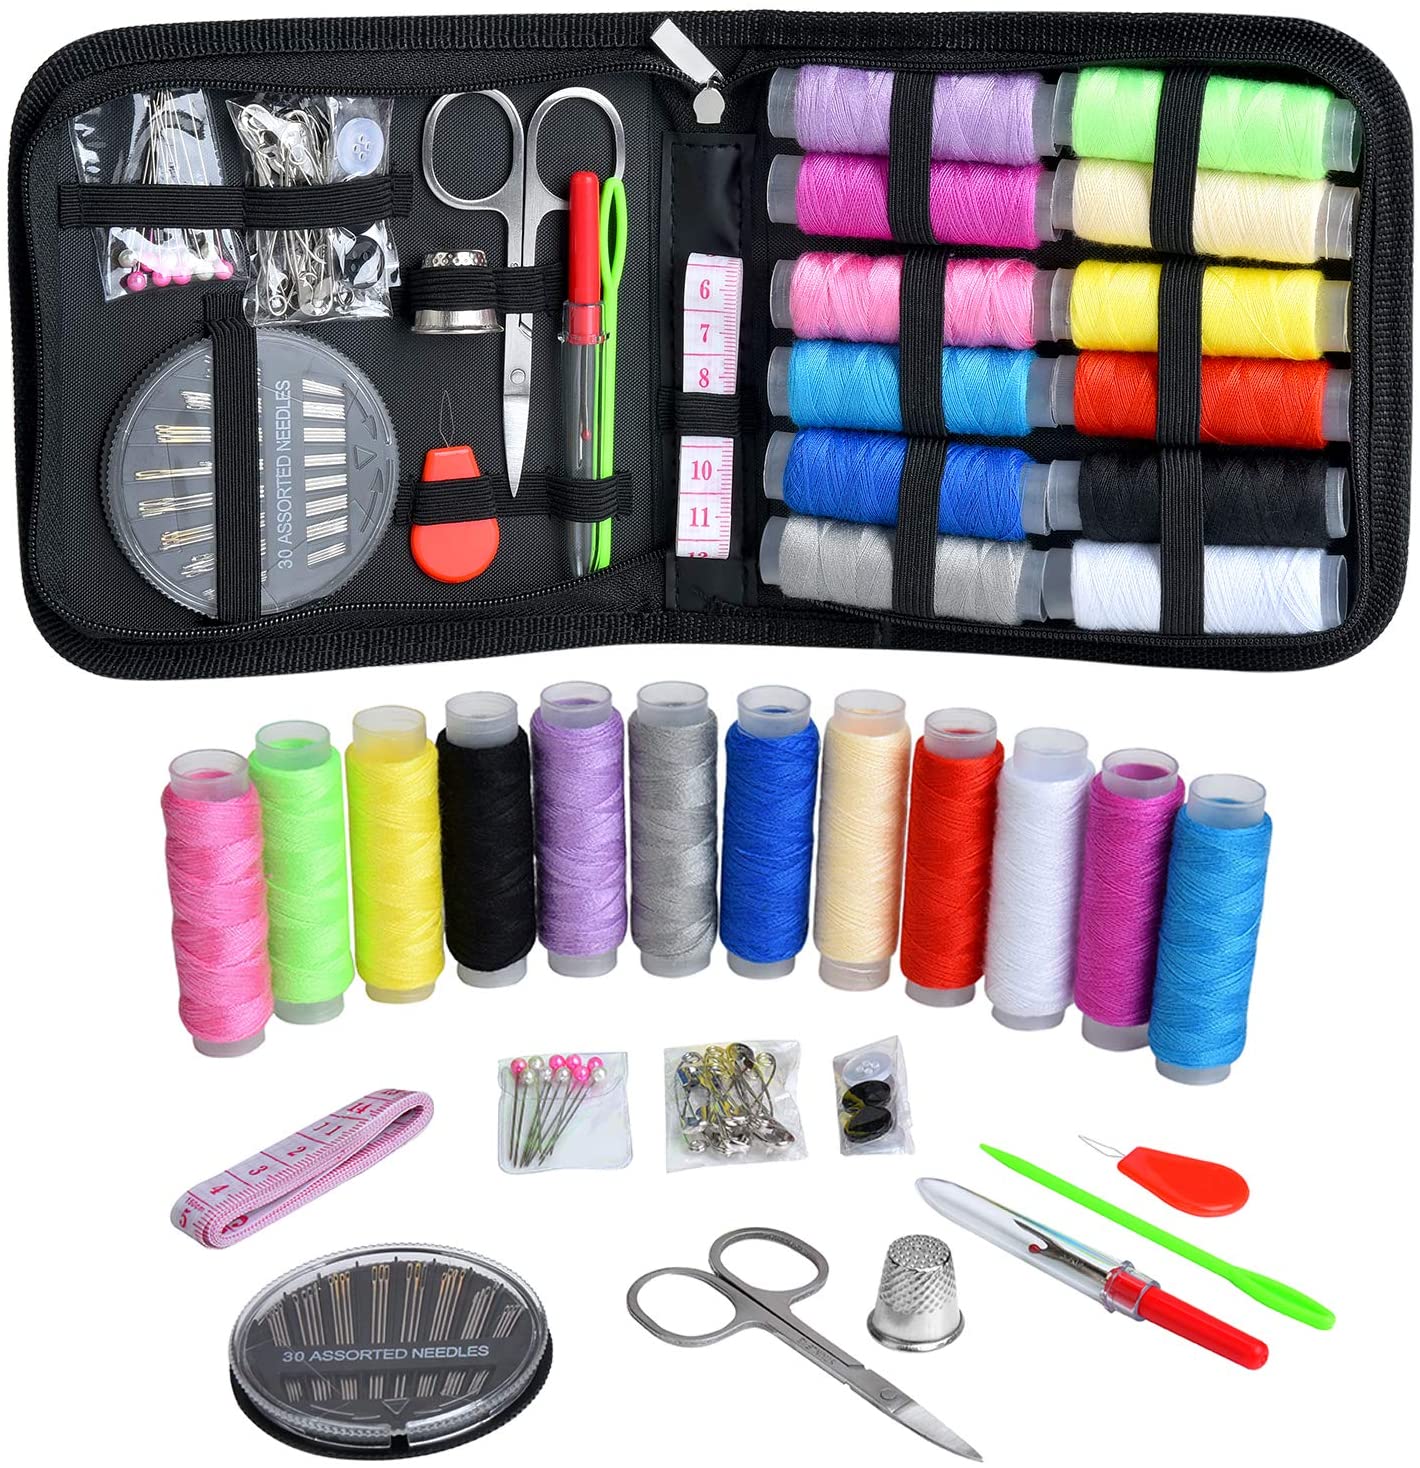 VelloStar Small Sewing Kit for Adults & Kids – Easy-to-Use Needle and  Thread Kit for Quick Fixes, Basic Emergency Sewing Kit with Sewing Supplies  and Accessories - Beginner Travel Sewing Kit 